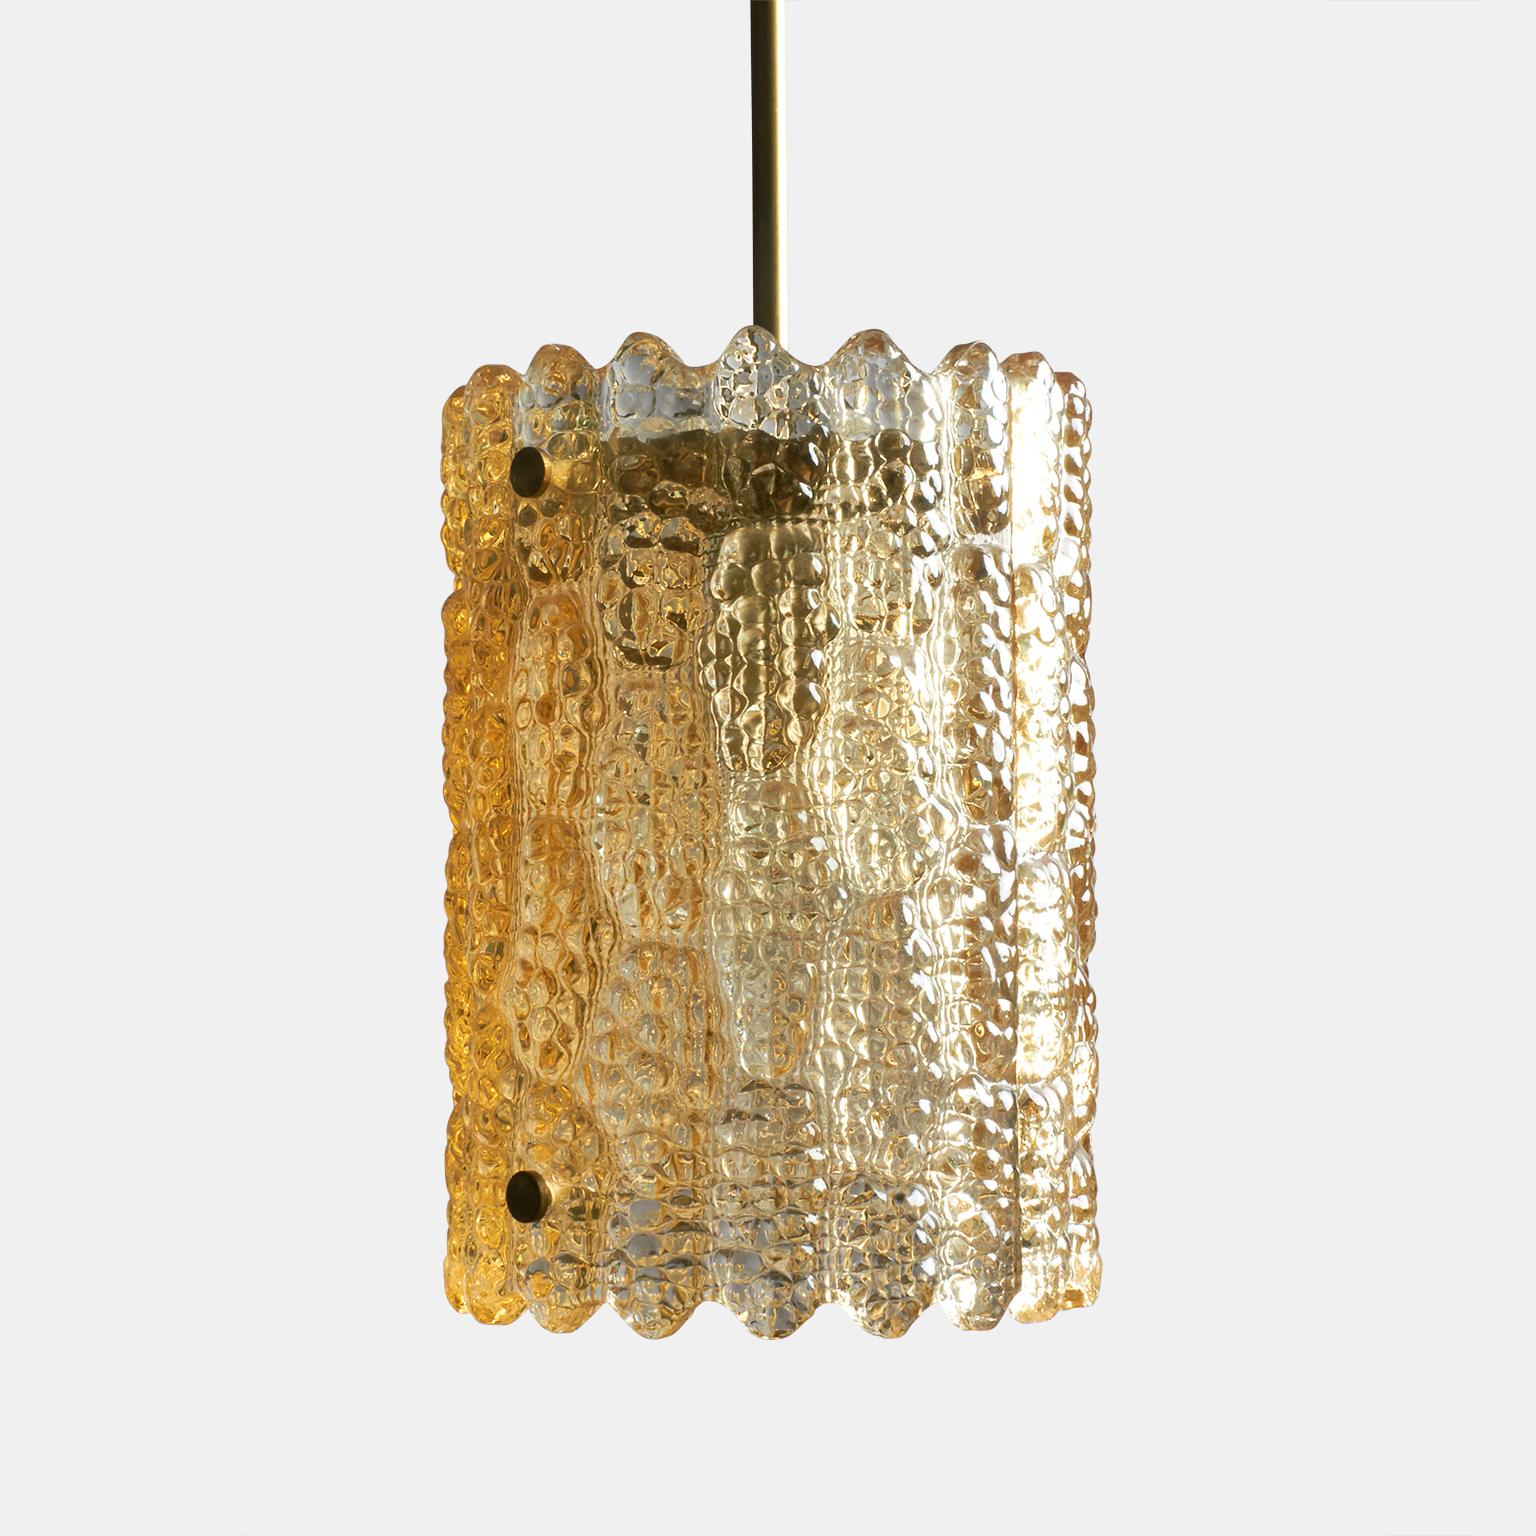 A pendant lamp of cast glass and brass by Carl Fagerlund for Orrefors. From their collection of lighting from the 1960s.